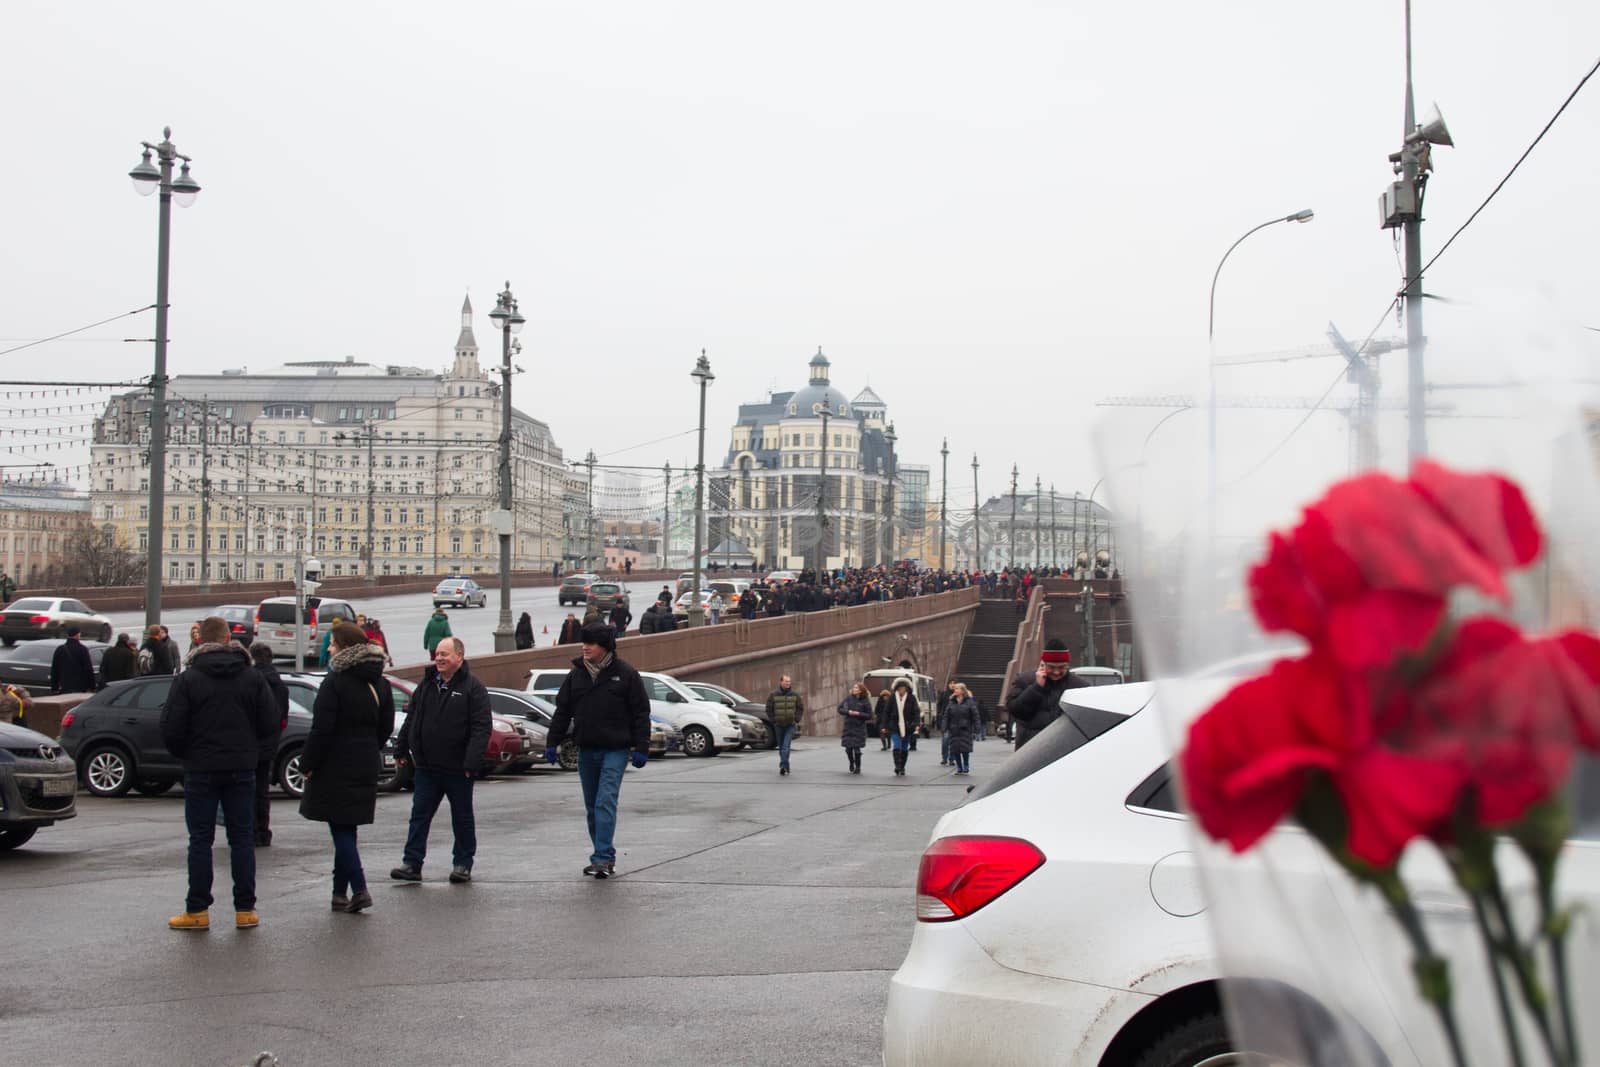 Moscow, Russia - February 28, 2015. People bring flowers to the site of the murder of politician Boris Nemtsov